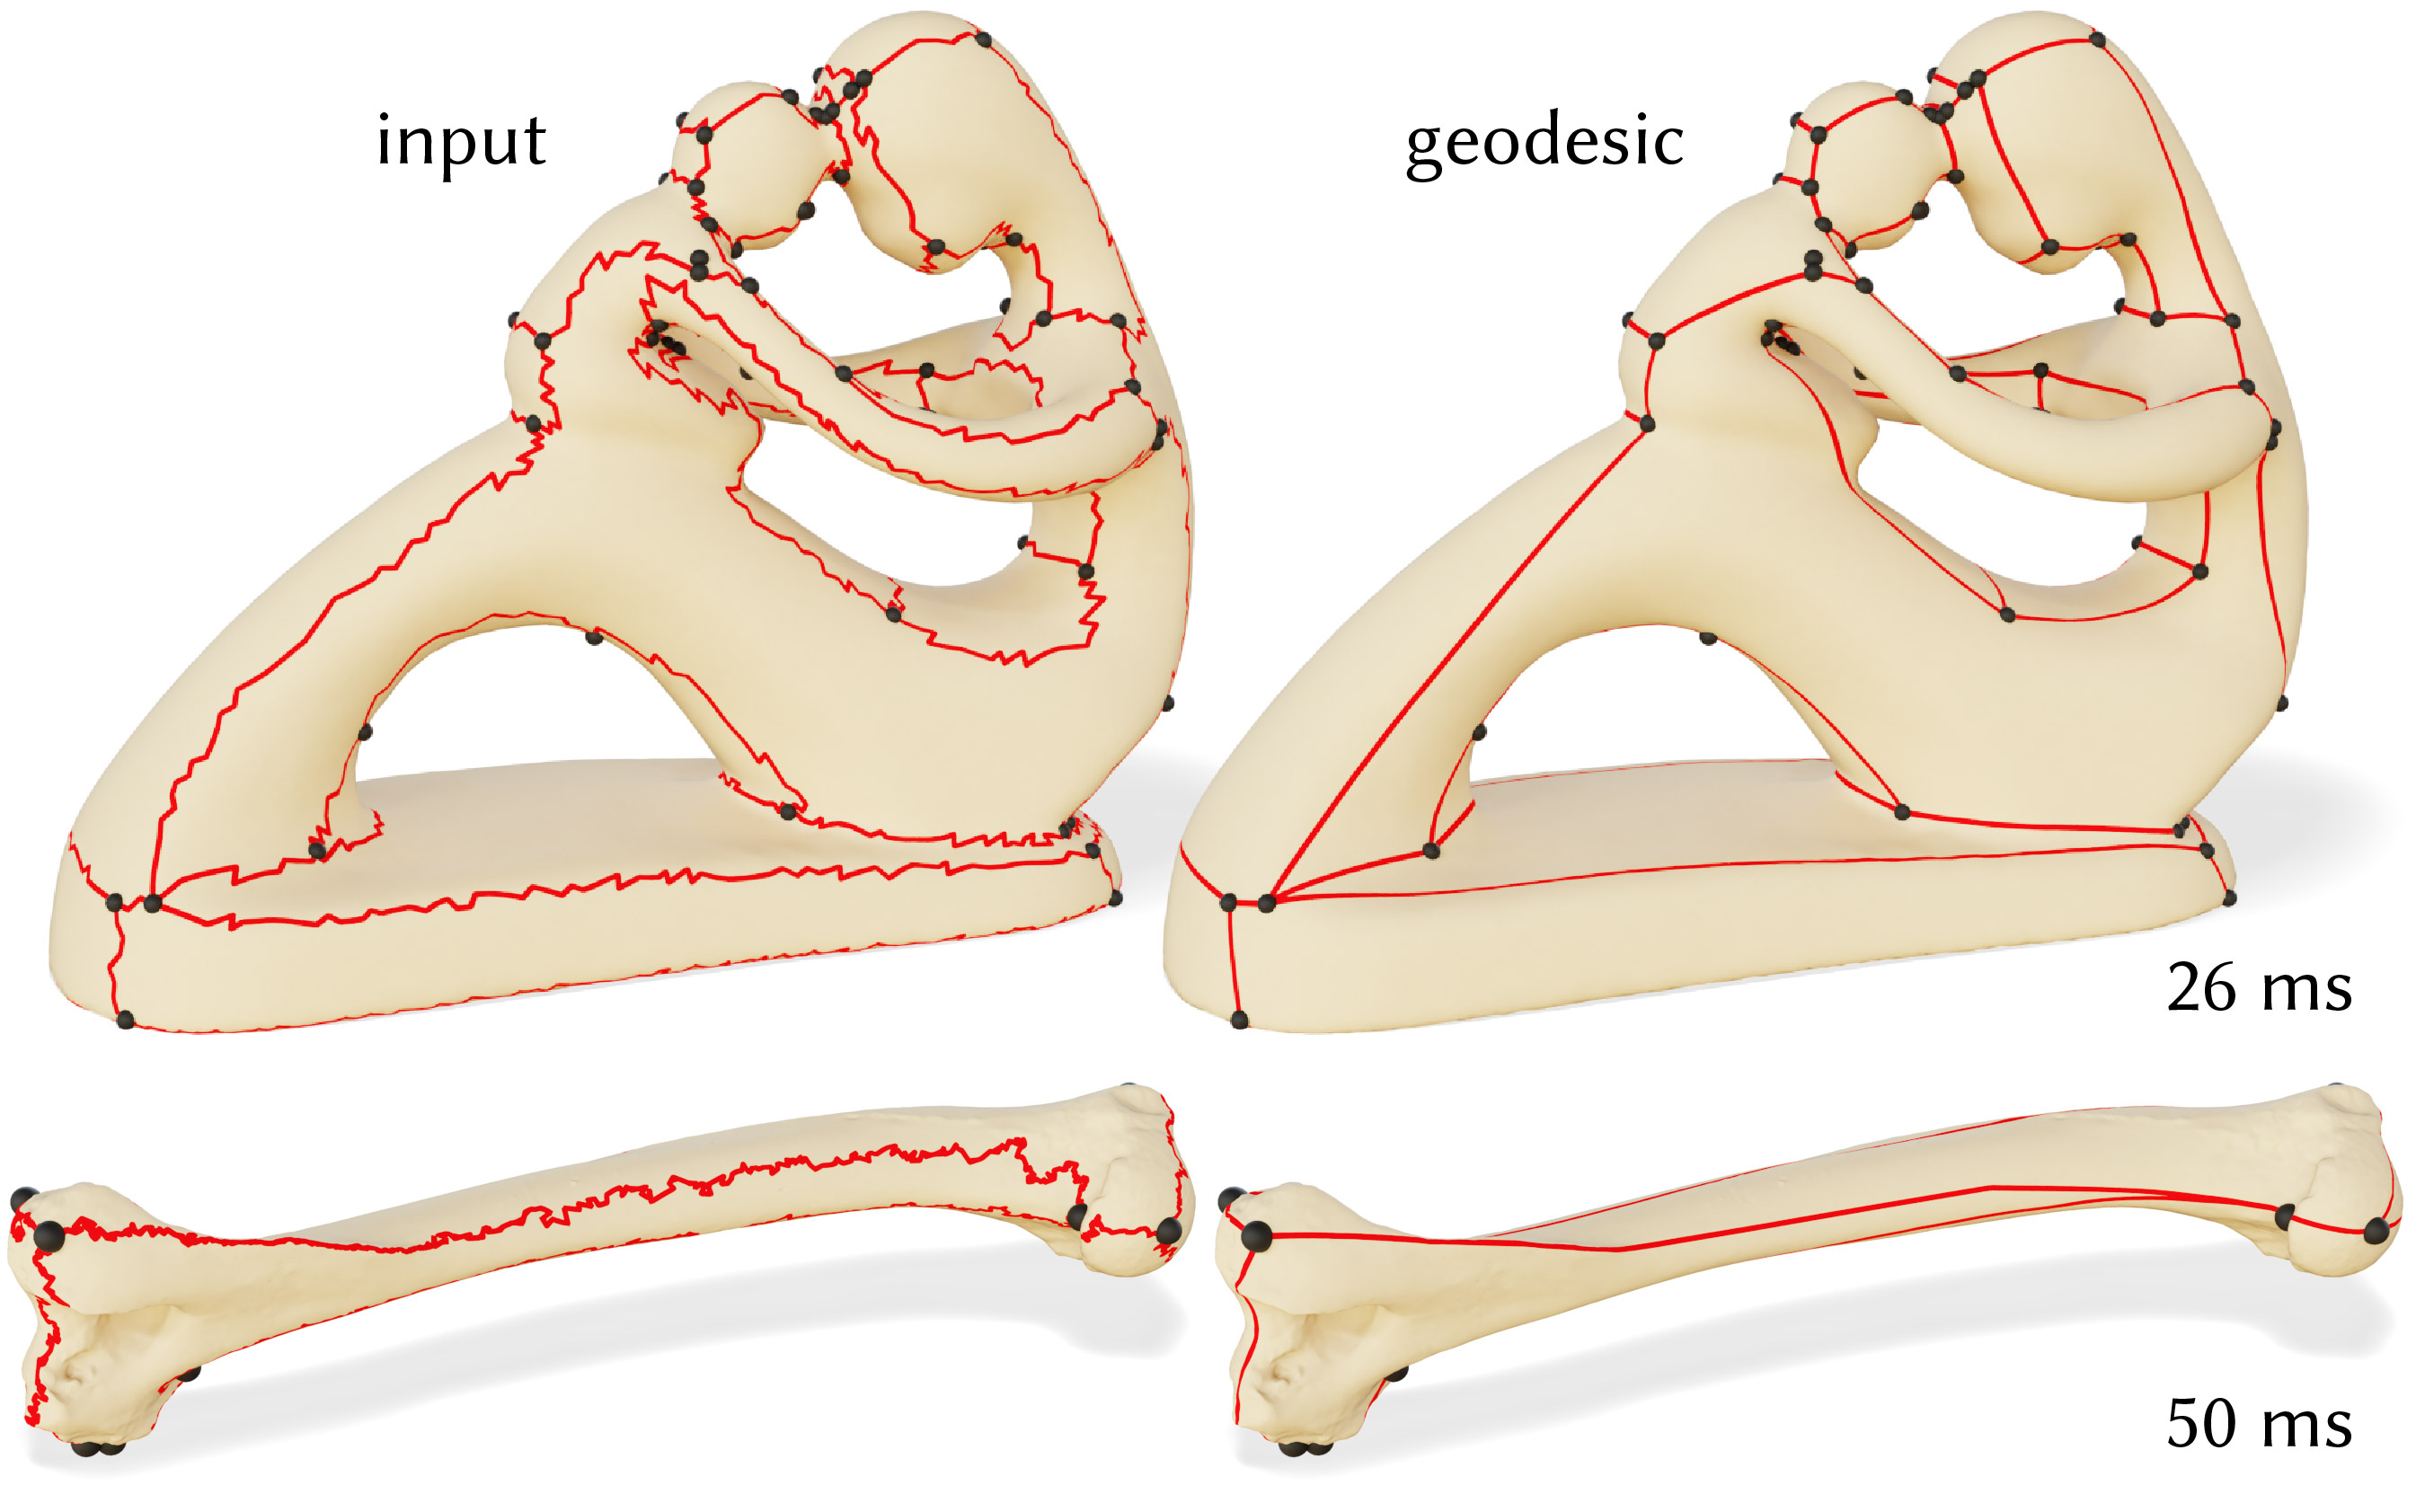 Curve networks arise naturally as texture seams in parameterizations; our algorithm can straighten these networks while preserving the cut topology.  Here, seams on 3D scans of a statue (top) and a panda humerus bone (bottom) are shortened to geodesic, while preserving seam junctions.